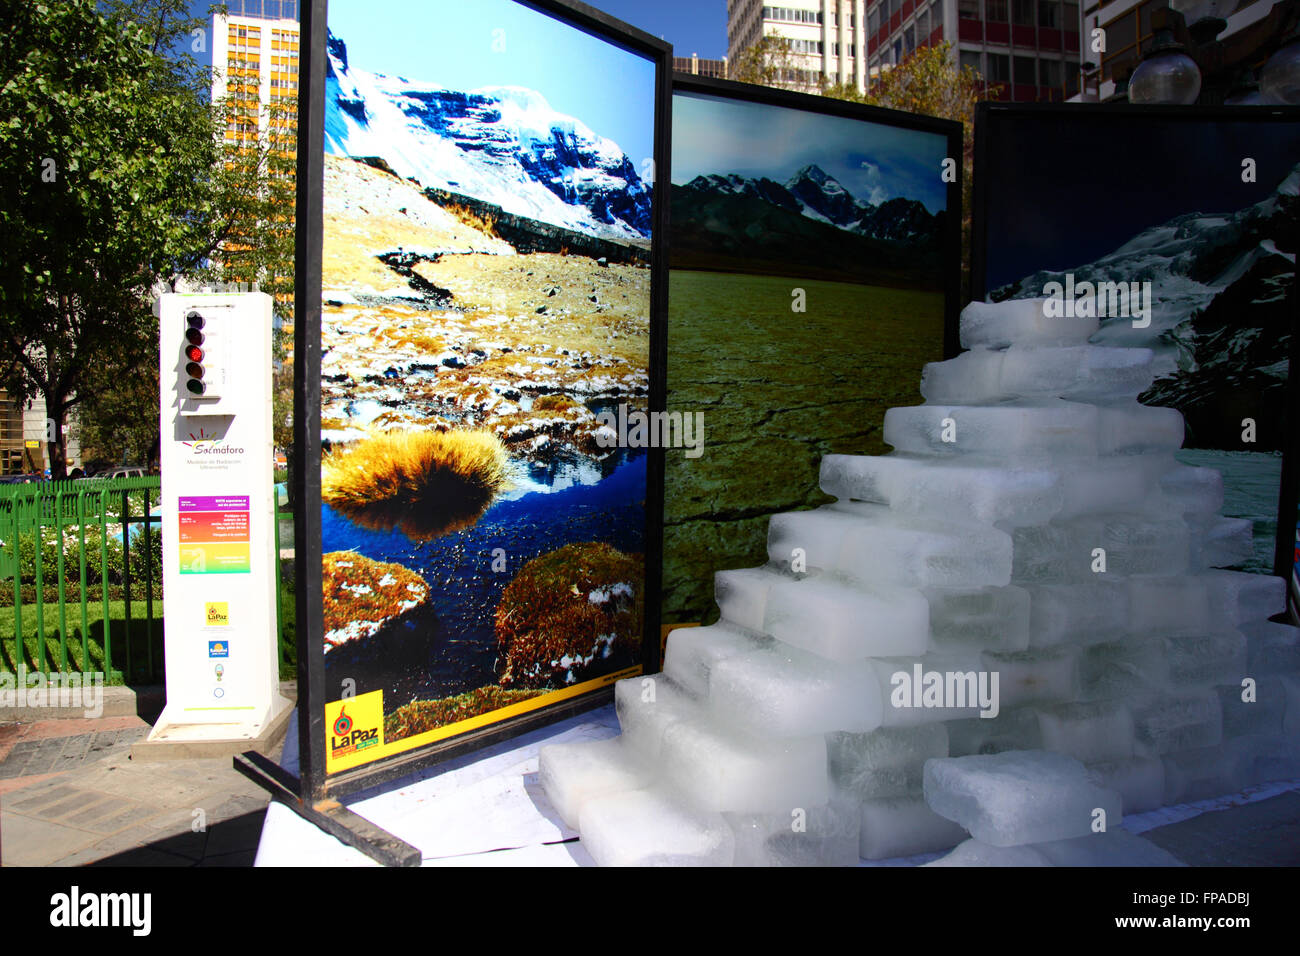 La Paz, Bolivia, 18th March 2016. Blocks of ice melt in front of photos of Bolivia's mountains at an event organised by the La Paz City Government to highlight global warming for Earth Hour (which takes place tomorrow). Next to the ice is a radiation meter showing solar UV levels. Credit:  James Brunker / Alamy Live News Stock Photo